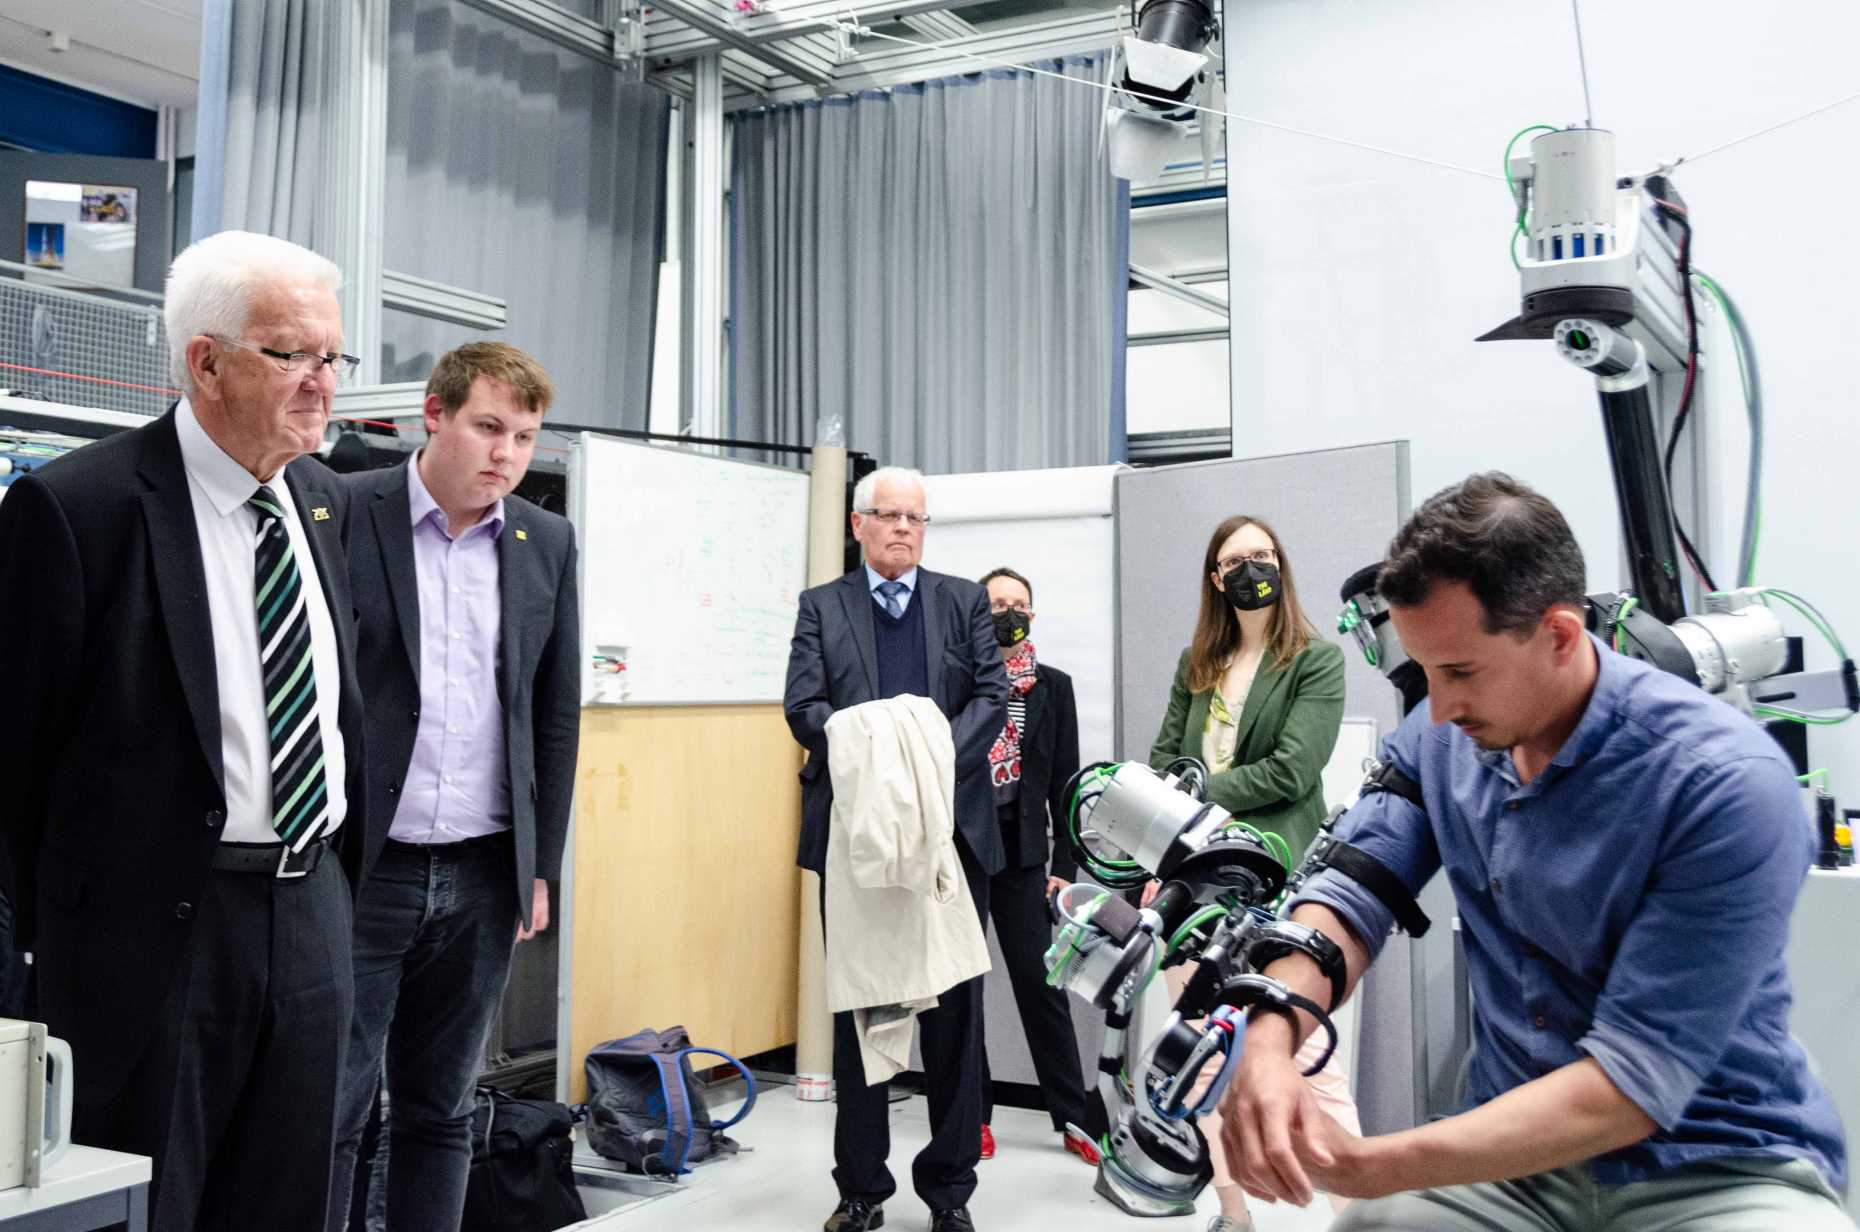 Enlarged view: Prime minister of Baden-Würtemberg Winfried Kretschmann visits the Laboratory